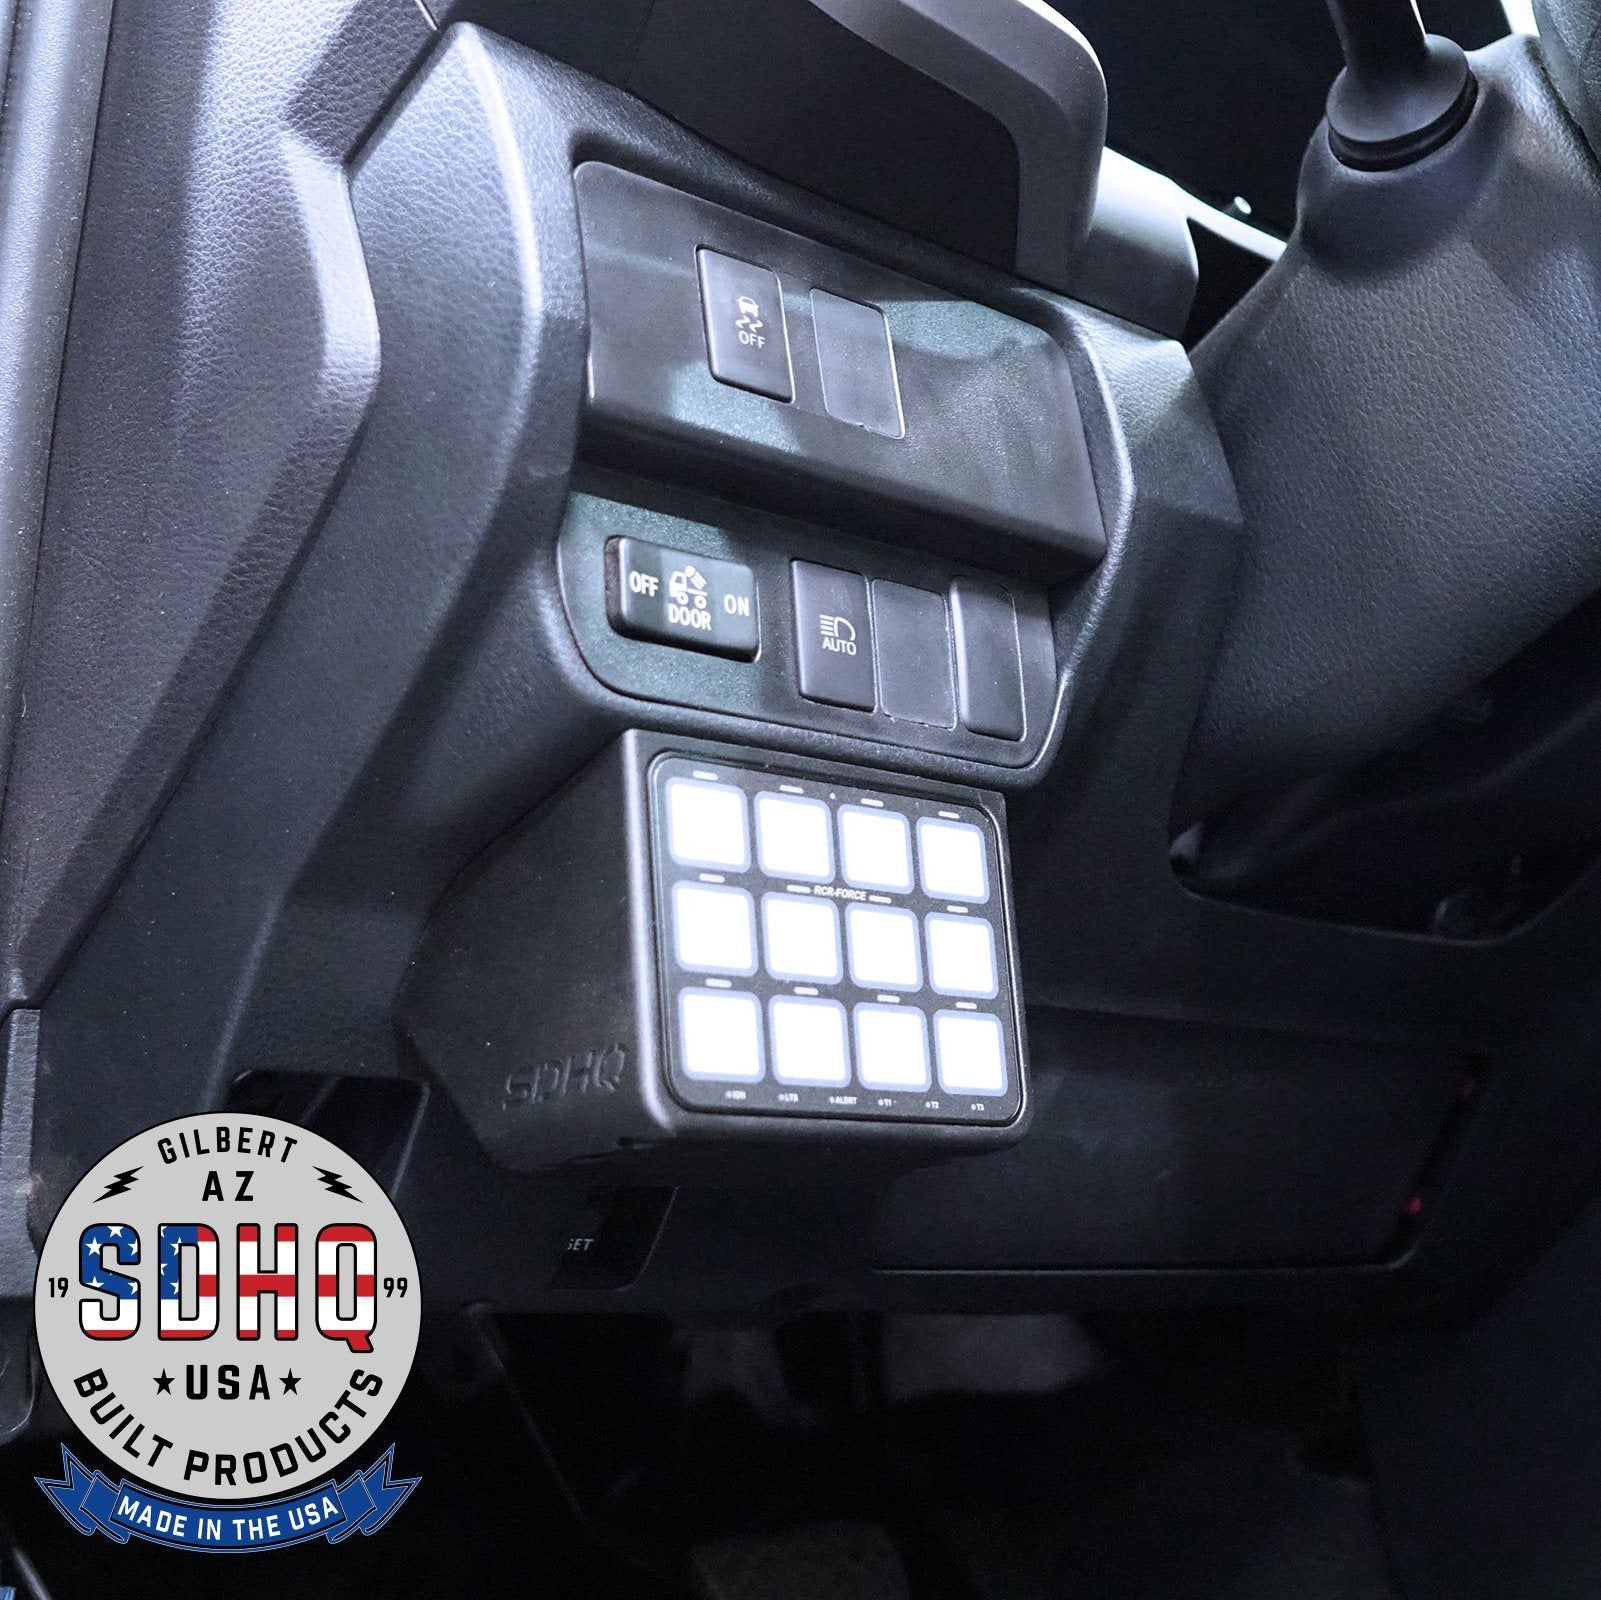 '16-23 Toyota Tacoma SDHQ Built Complete Switch Pros RCR-FORCE-12 Mounting Kit Lighting SDHQ Off Road display